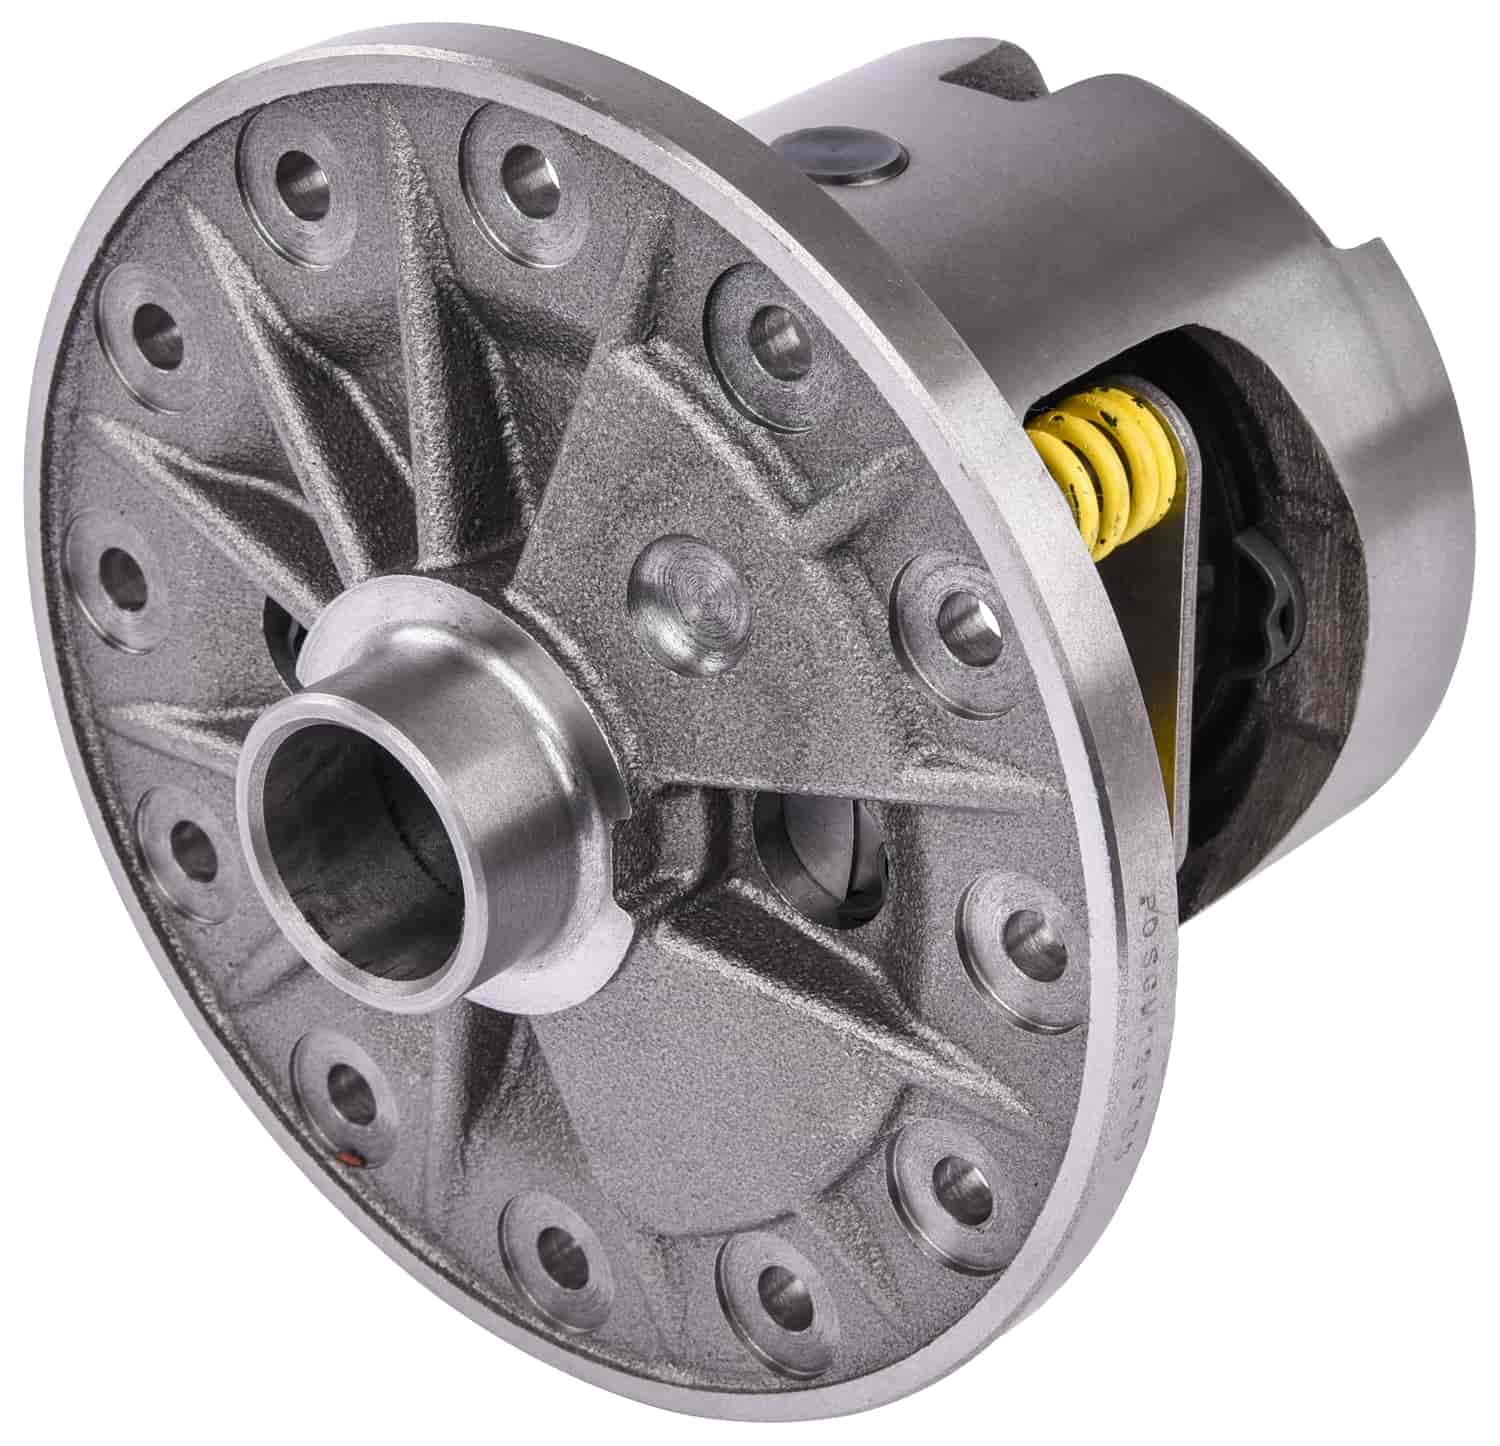 Posi Traction Differential for GM Car 12-Bolt 8.875" Rear, 33-Spline [3.08-3.90 Ratio]